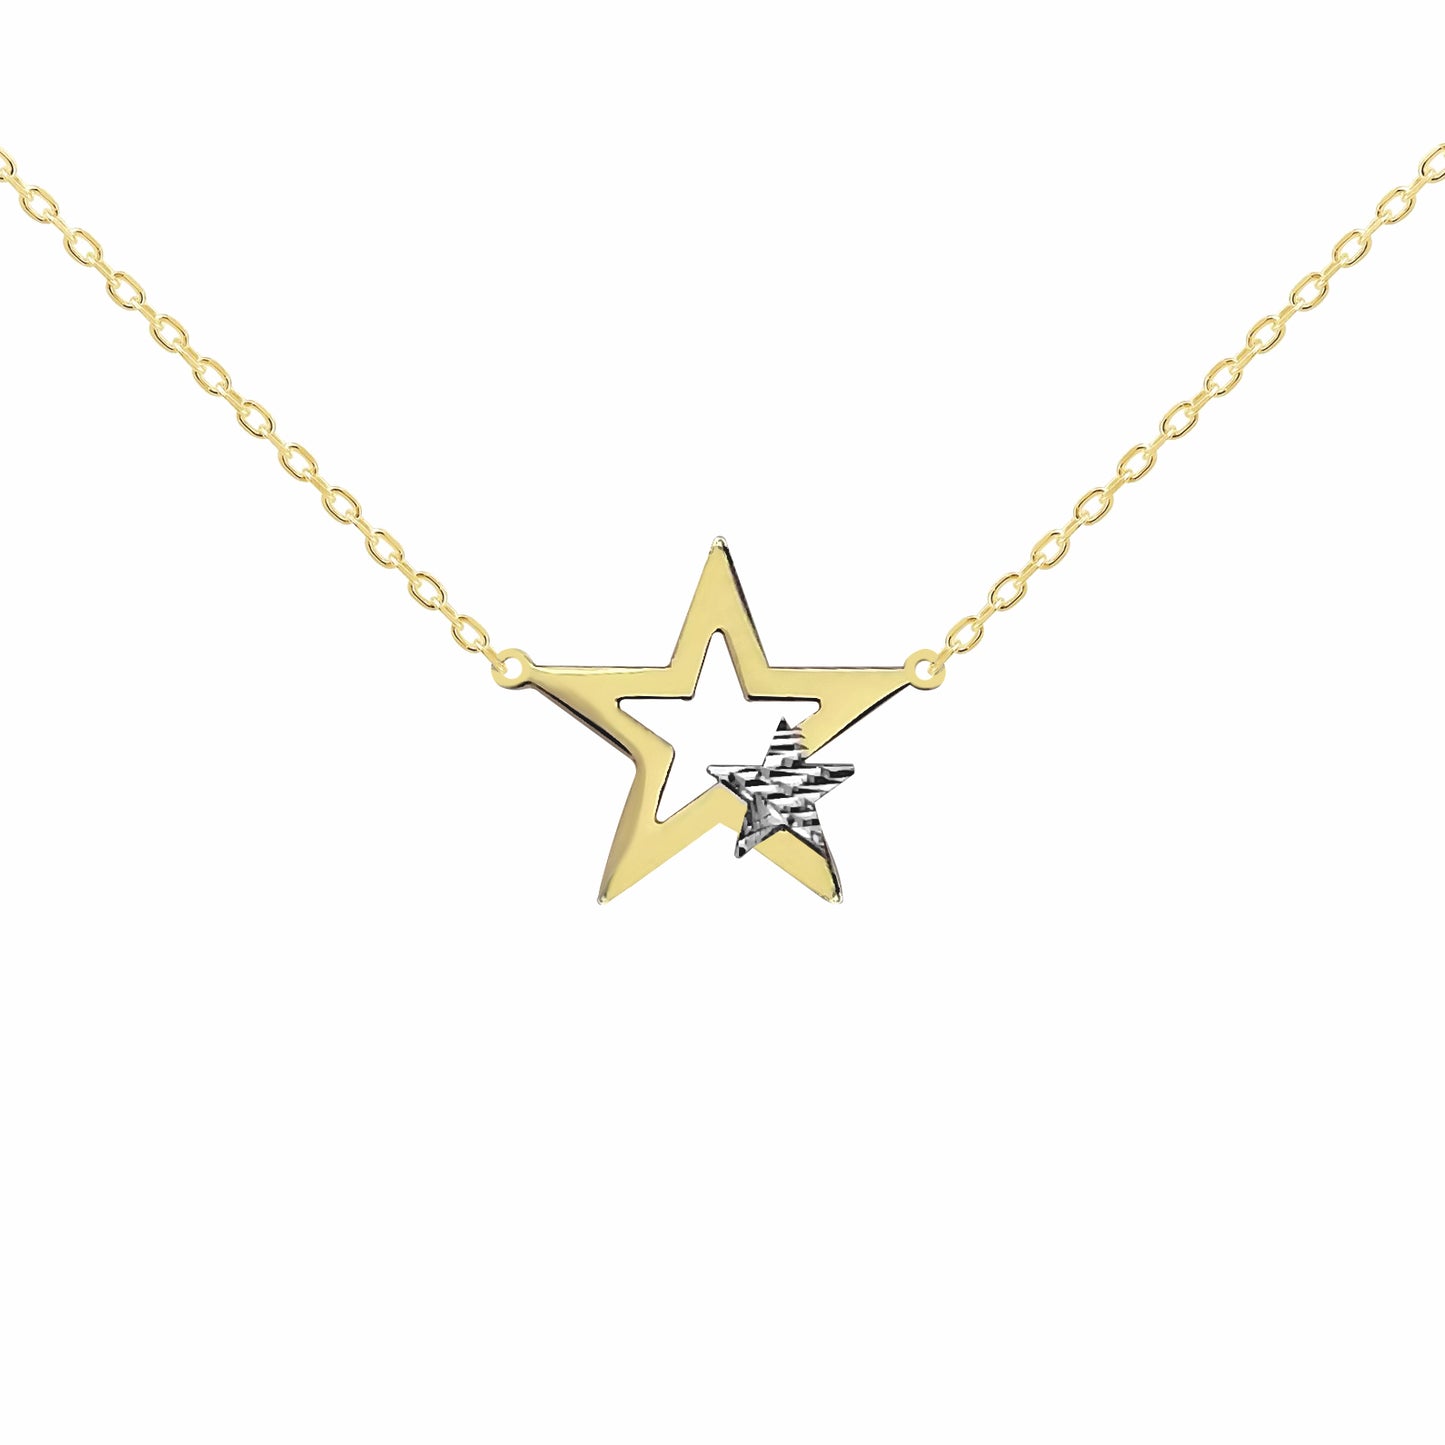 9ct 2-Colour Gold  Twinkle Star 0.9mm Charm Necklace, 17 inch - JBB384